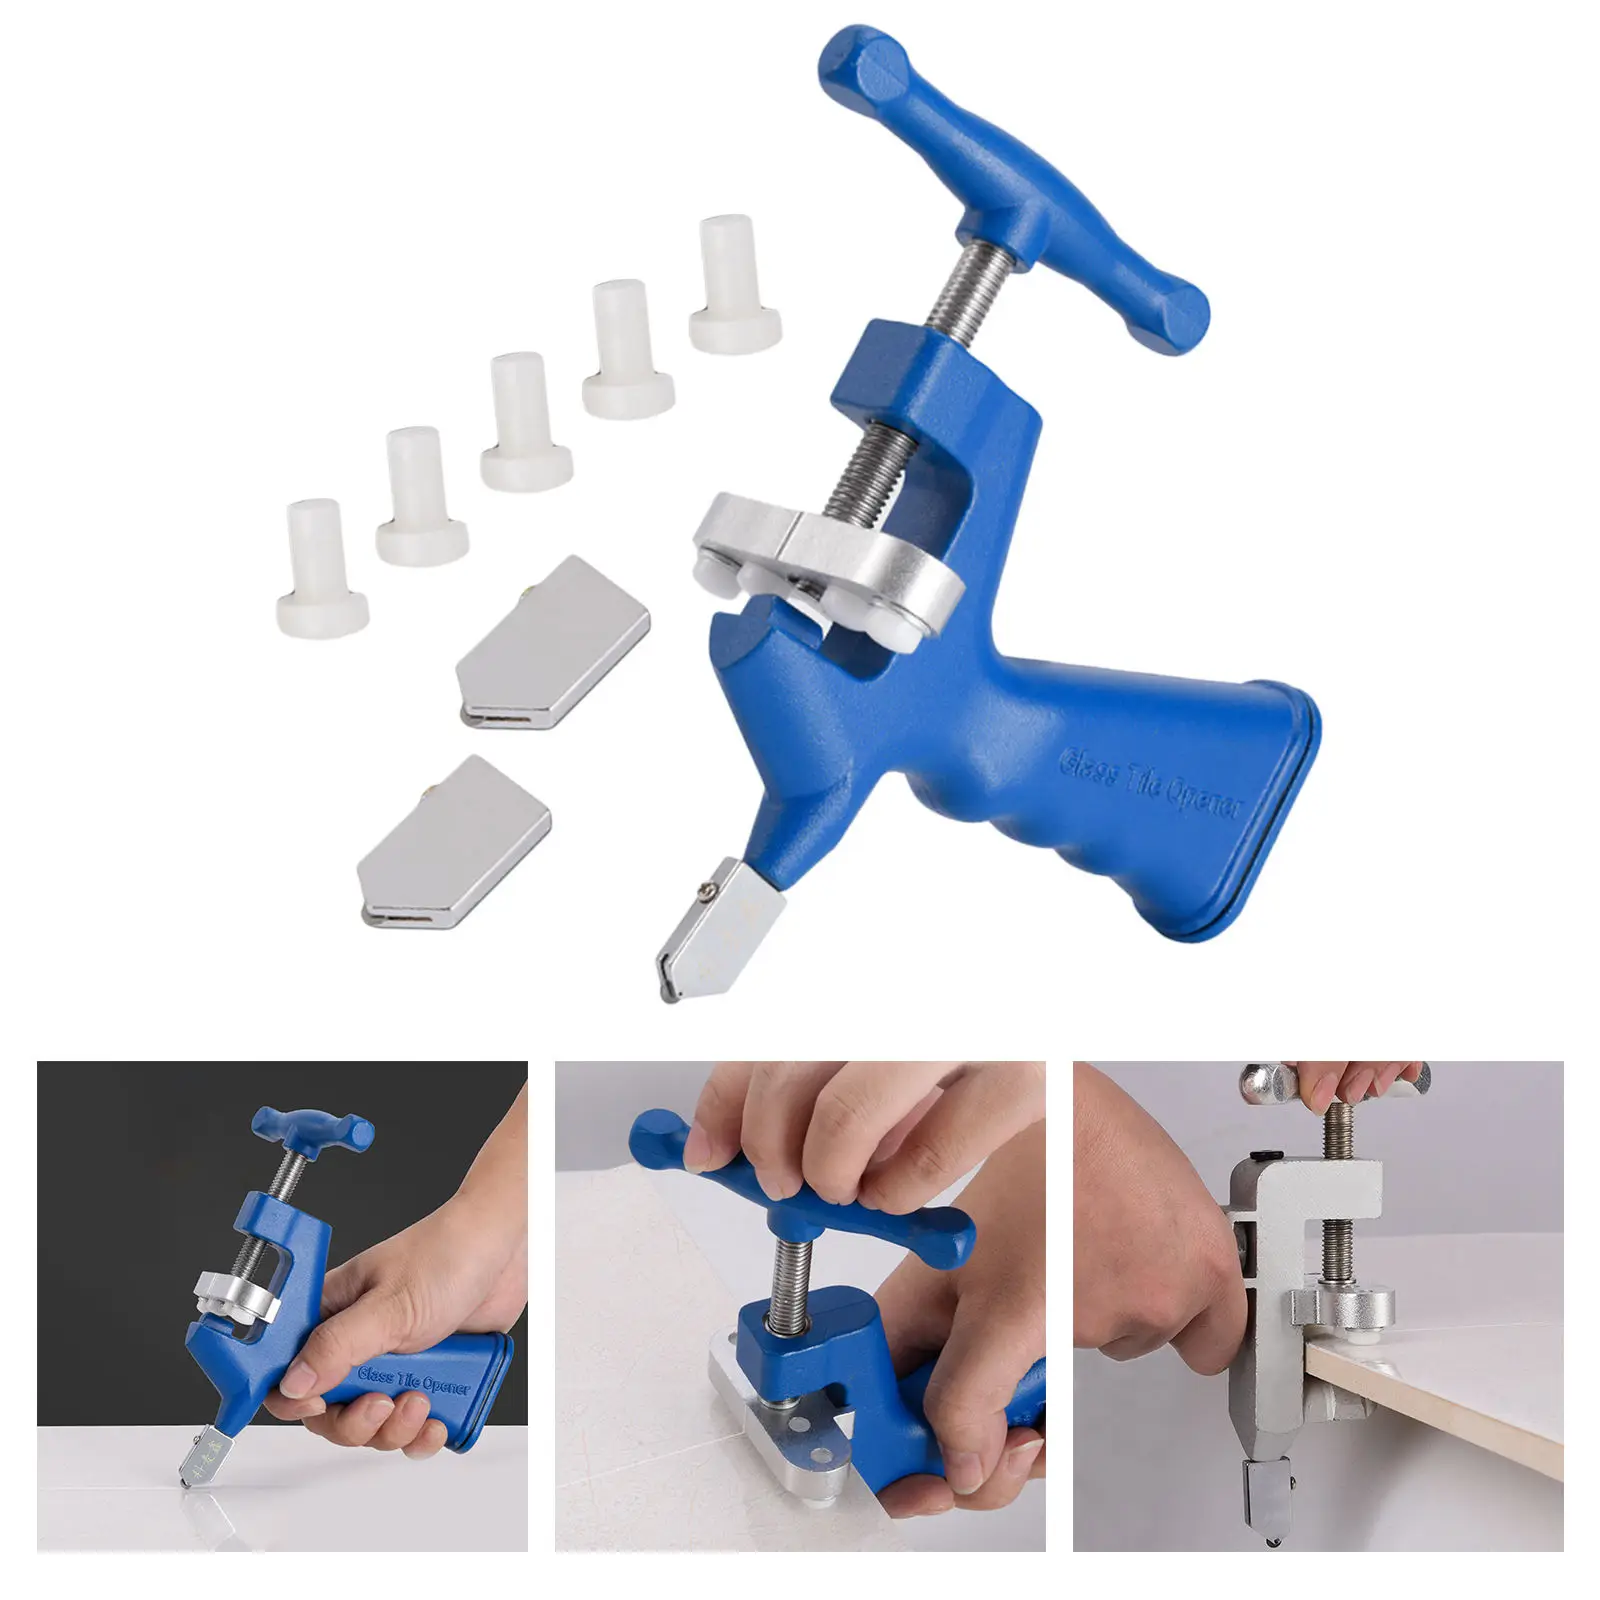 2 in 1 Glass Cutter Tool Easy Glide Hand Cutting Tool with Breaking Pliers Manual Roller Knife Opener for Tiles Windows Ceramic